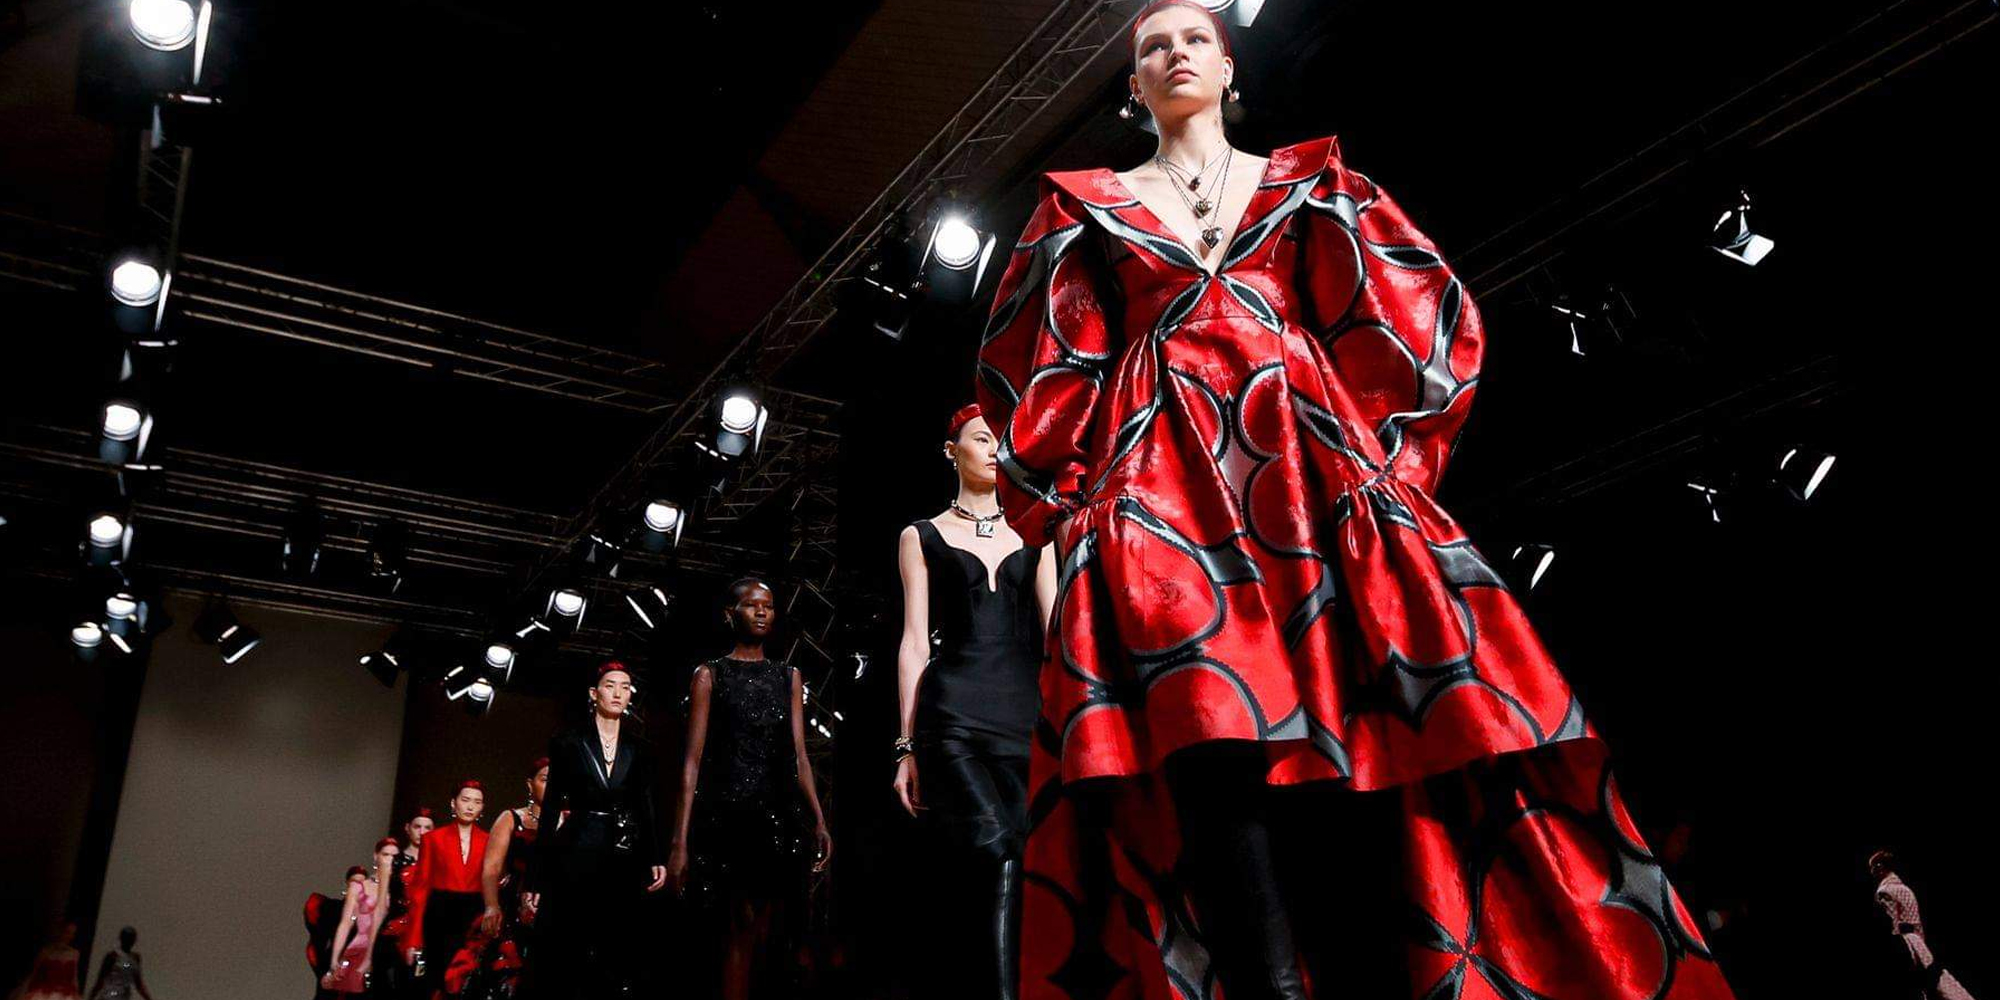 Watch the Alexander McQueen Fall 2022 RTW Runway Show Live | LES FAÇONS